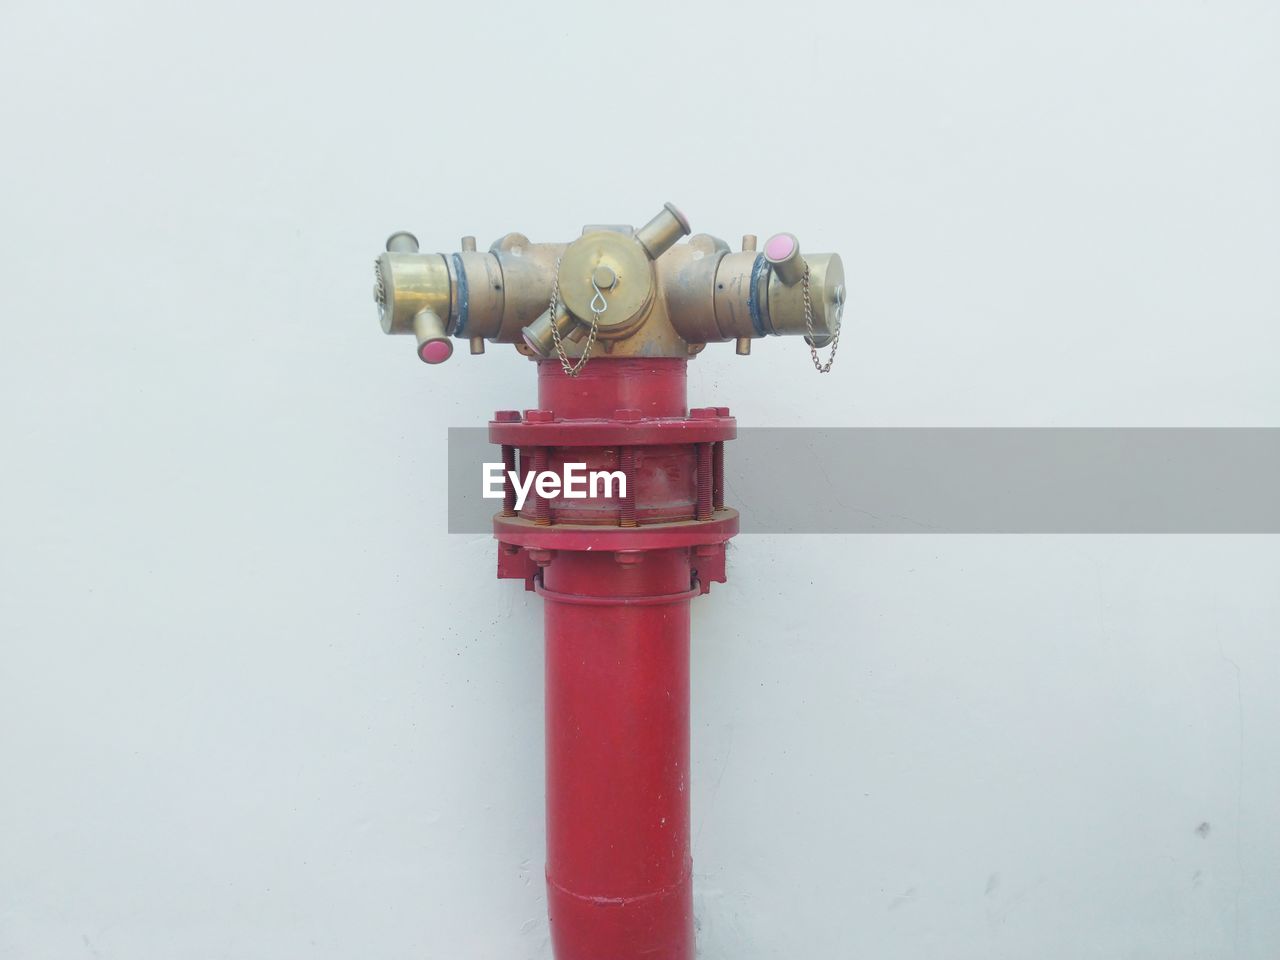 CLOSE-UP OF RED FIRE HYDRANT